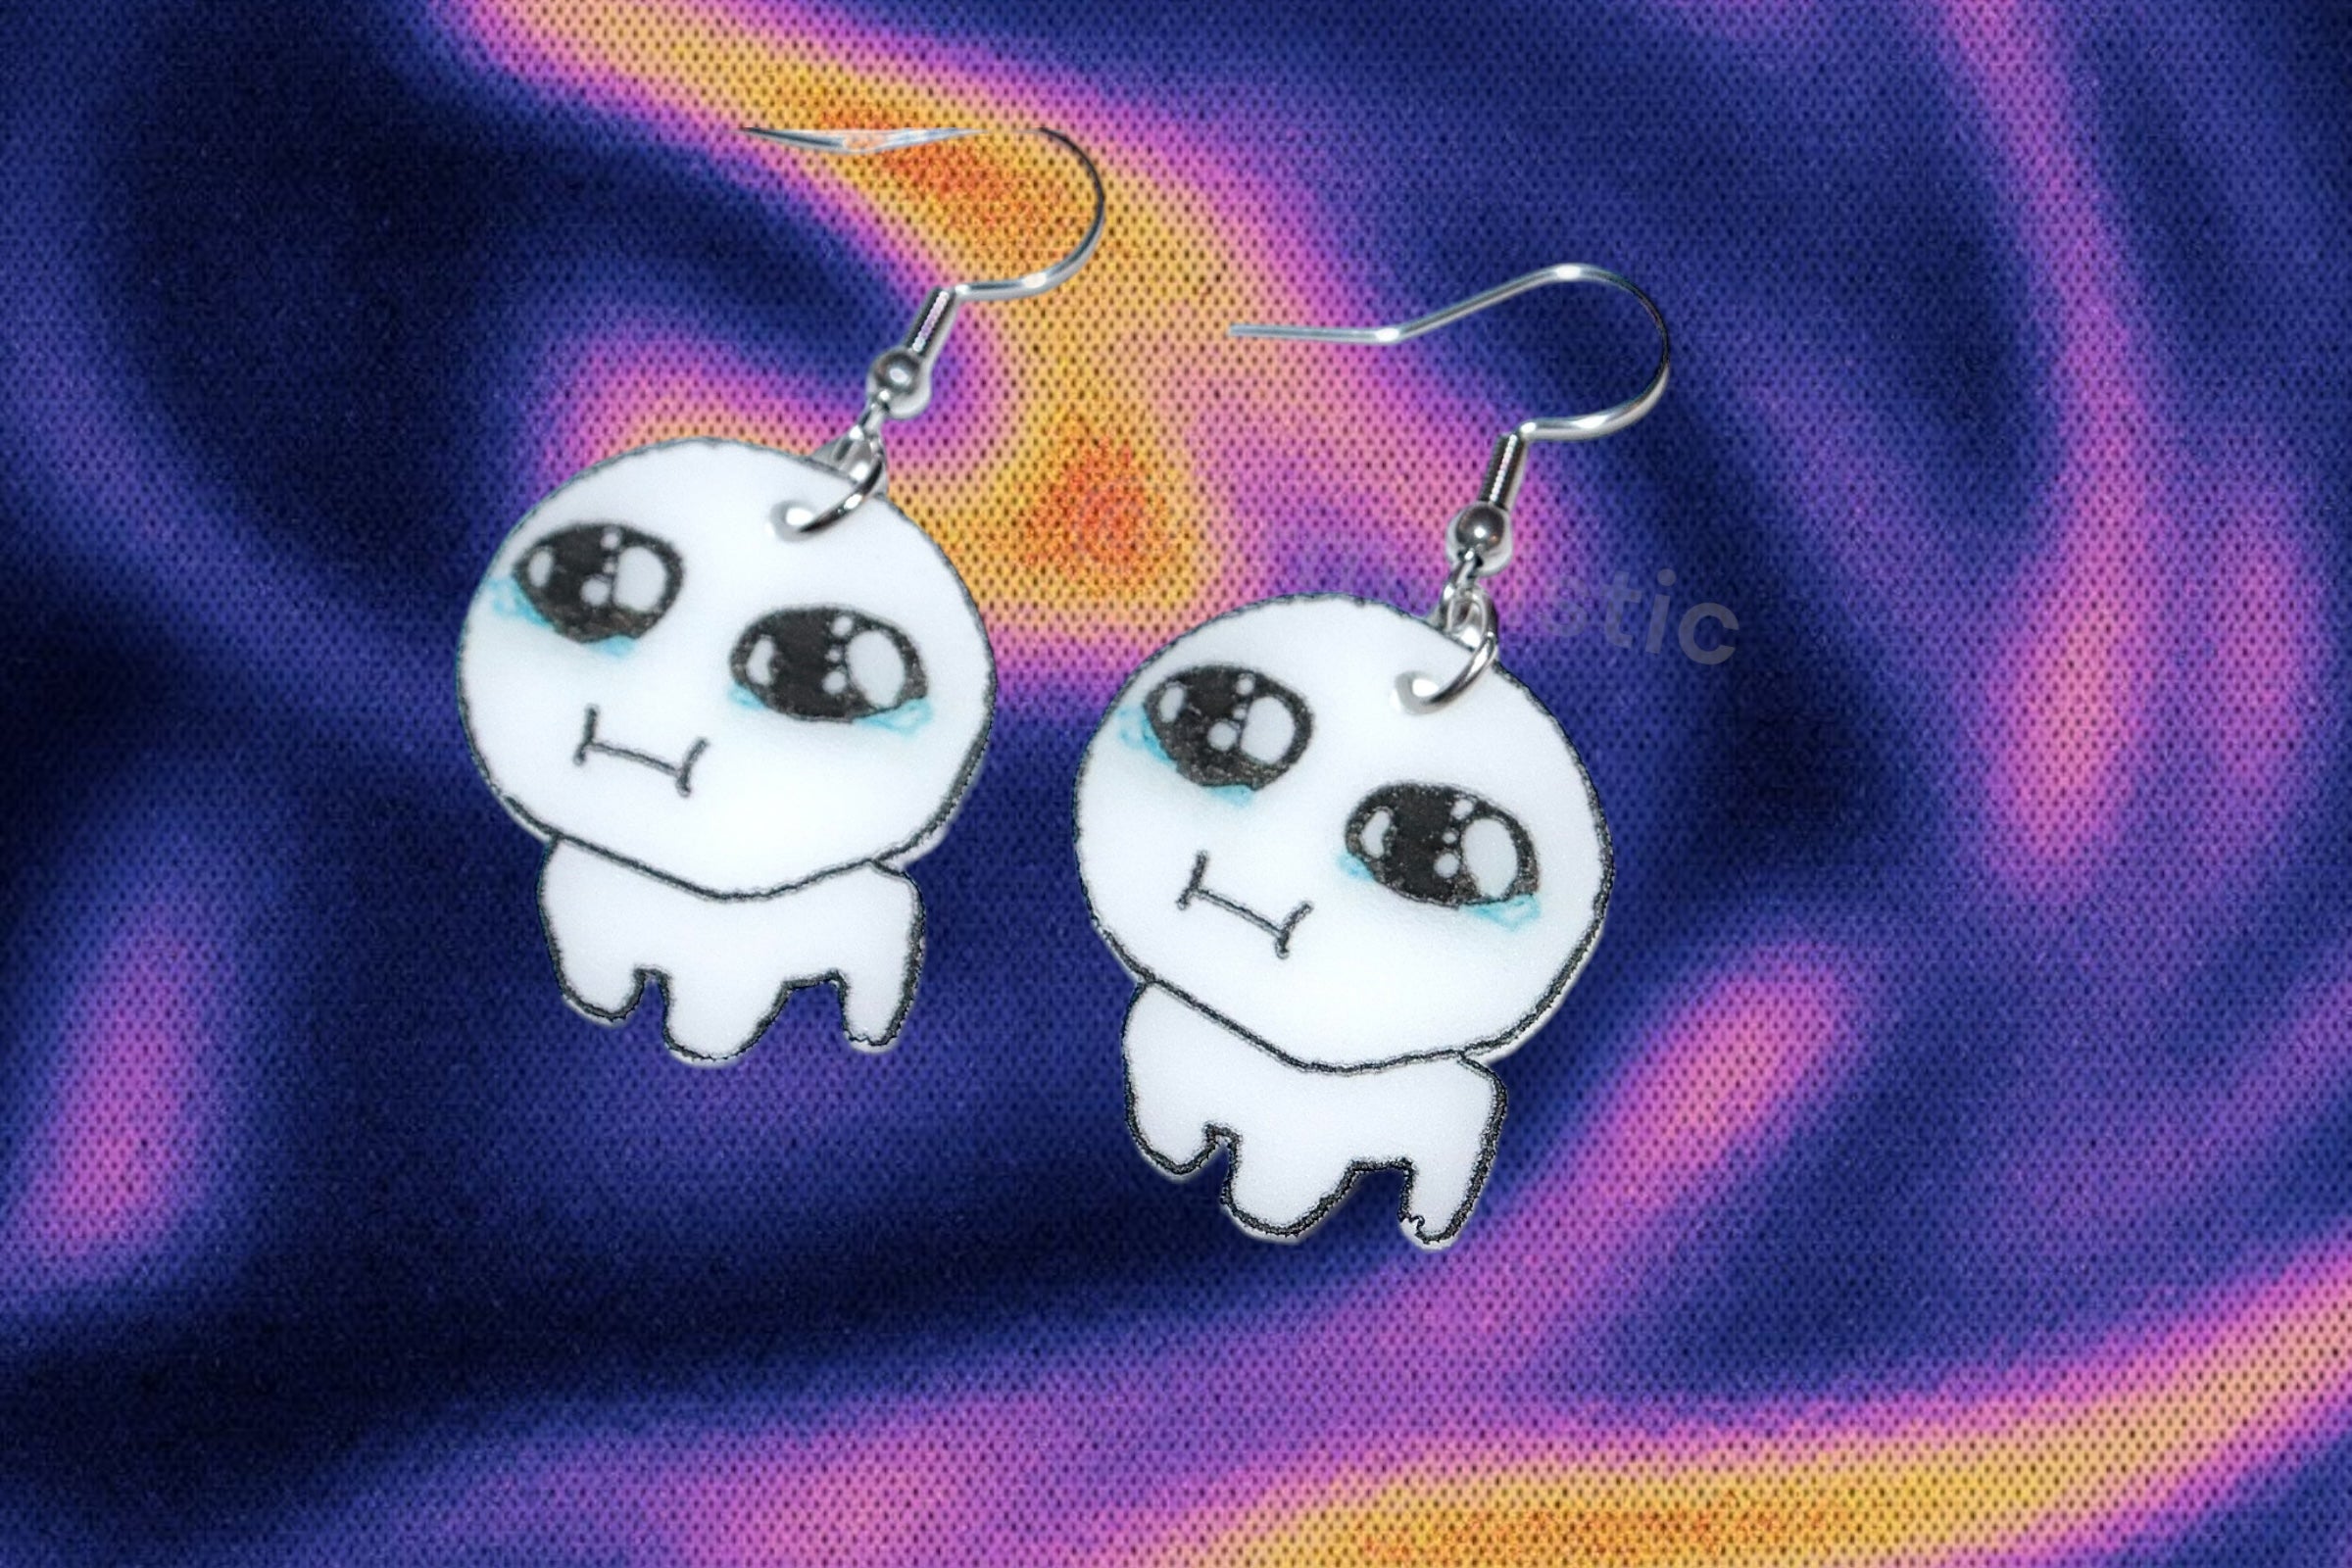 Autism/TBH Creature Crying and Sad Meme Handmade Earrings!